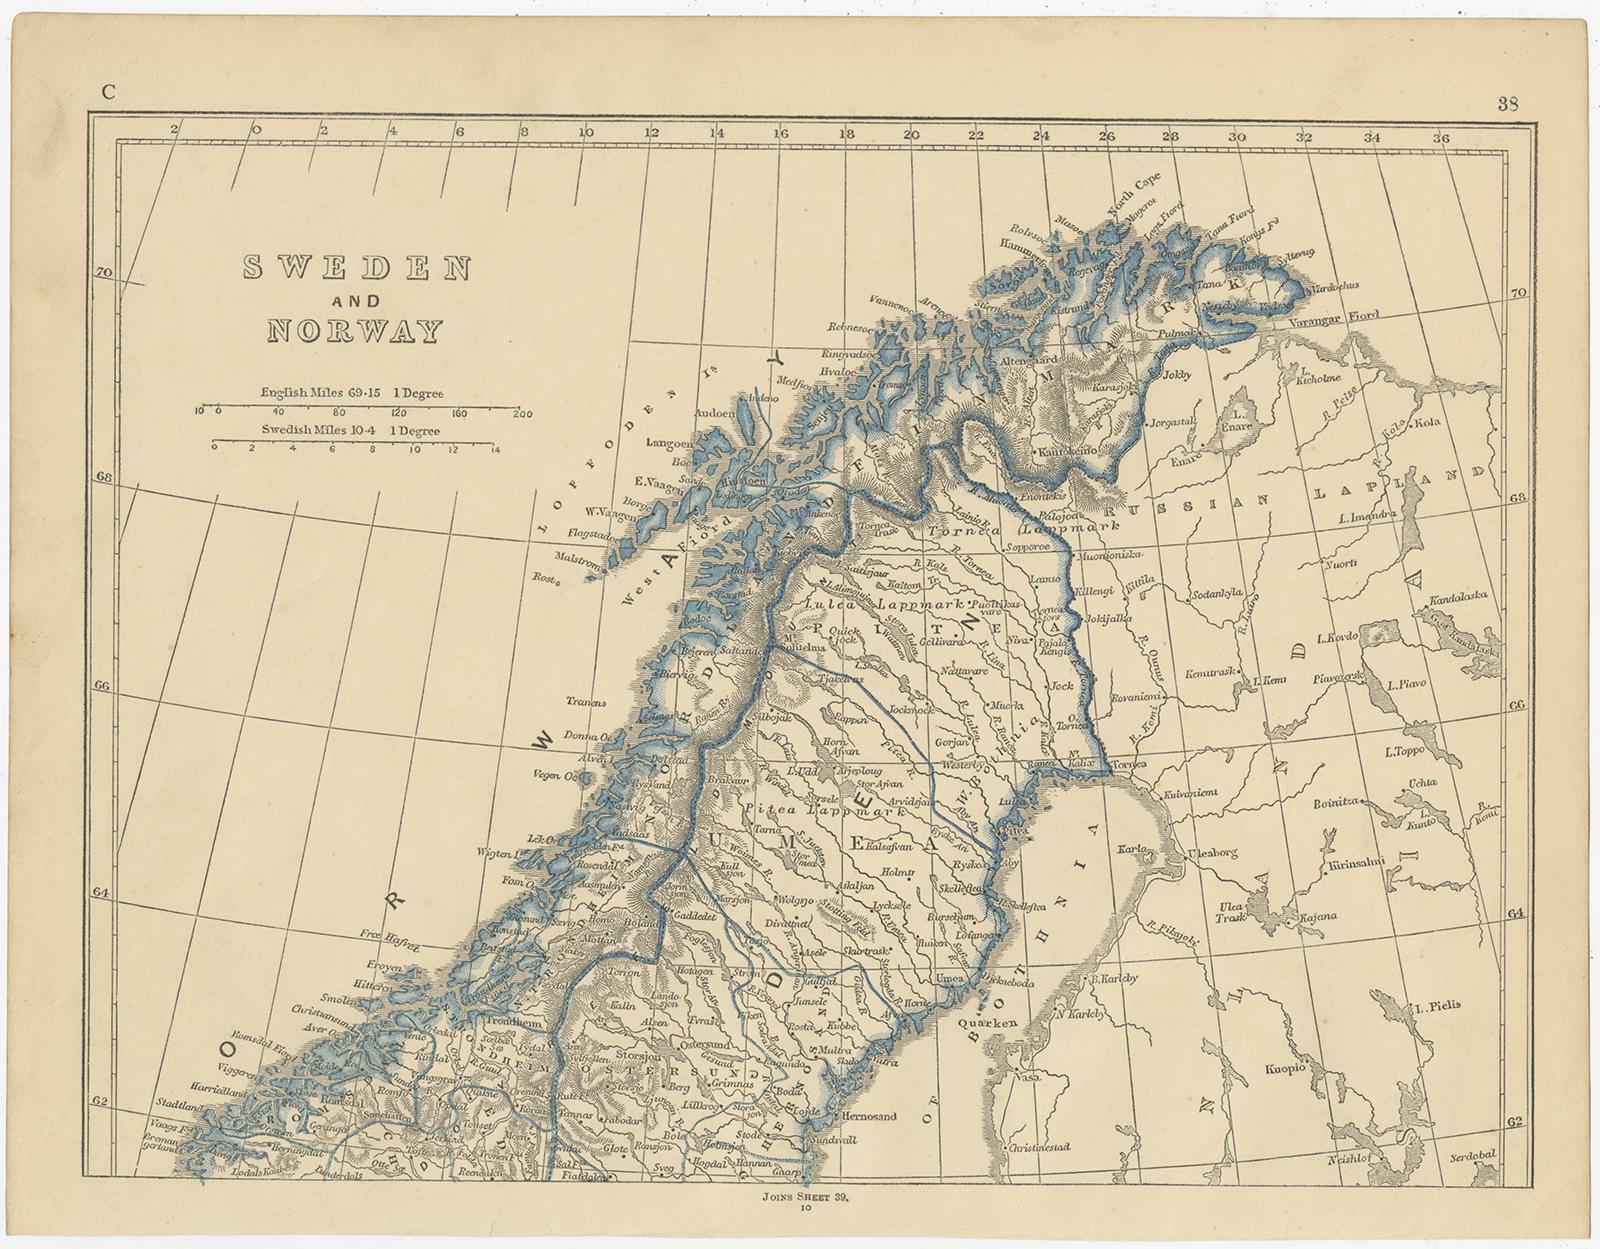 Antique map titled 'Sweden and Norway'. Two individual sheets of Sweden and Norway. This map originates from 'Lowry's Table Atlas constructed and engraved from the most recent Authorities' by J.W. Lowry. Published 1852.